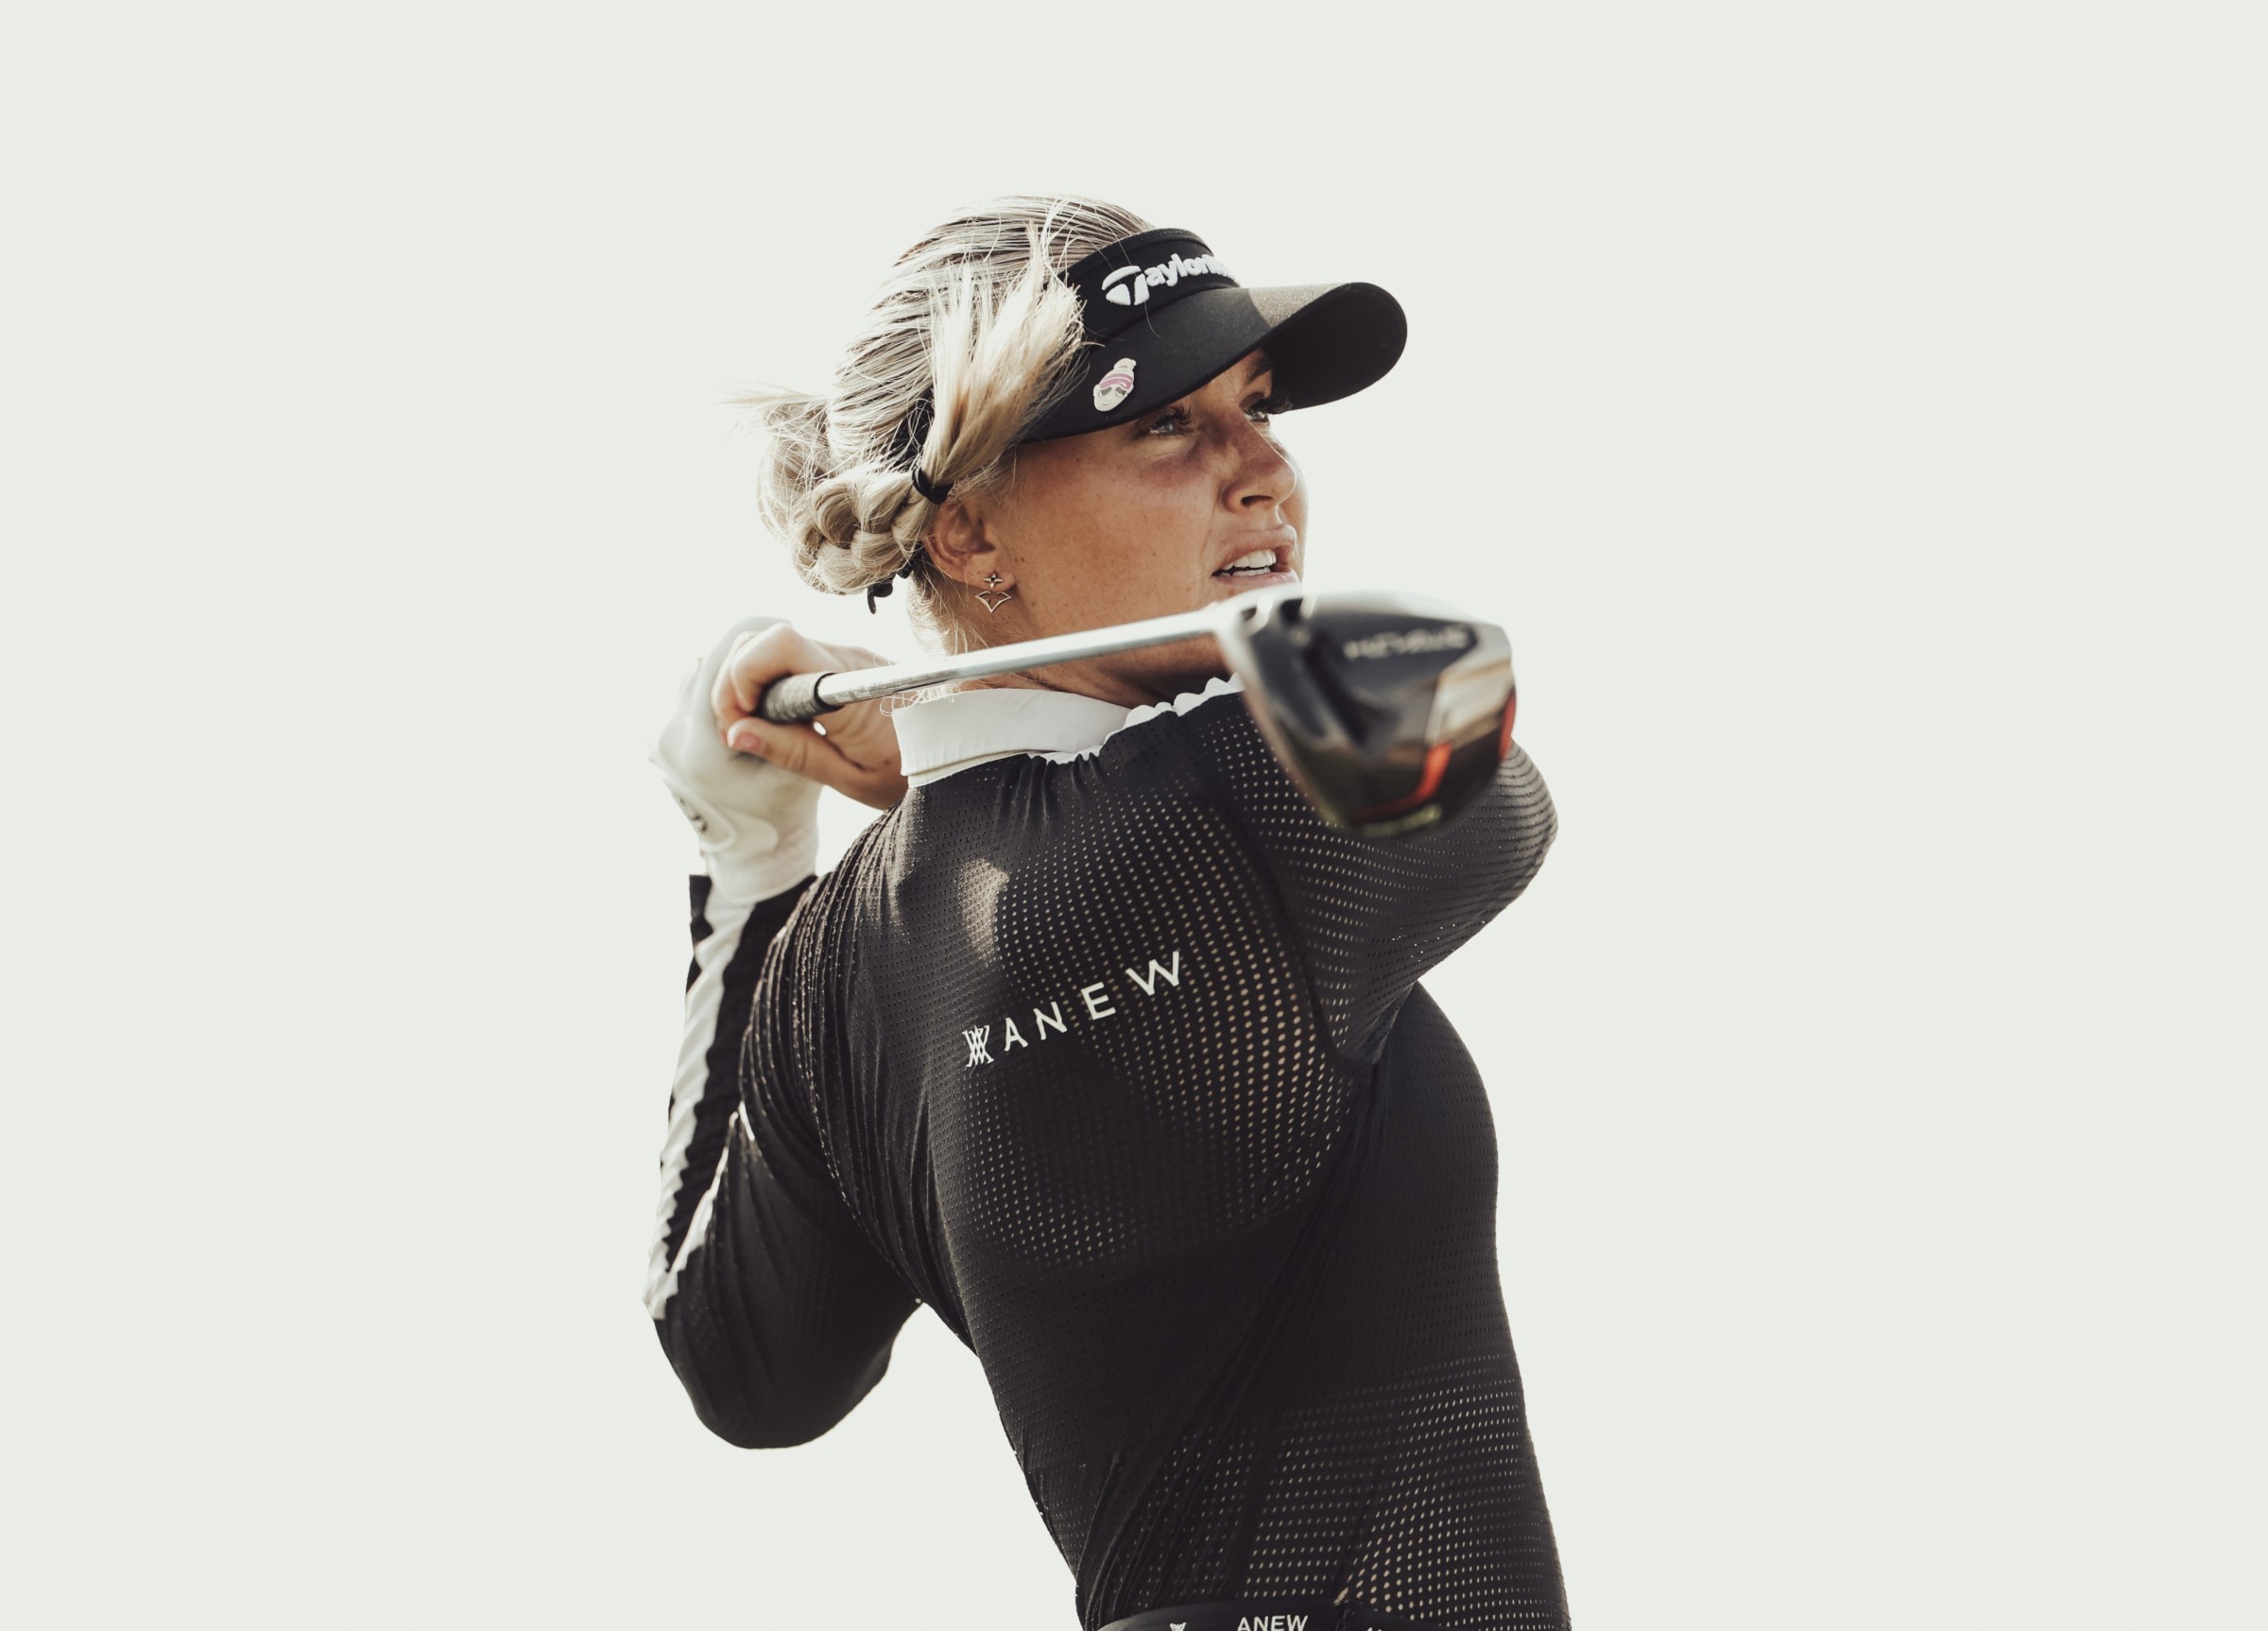 An Interview with English Golfing Champion Charley Hull